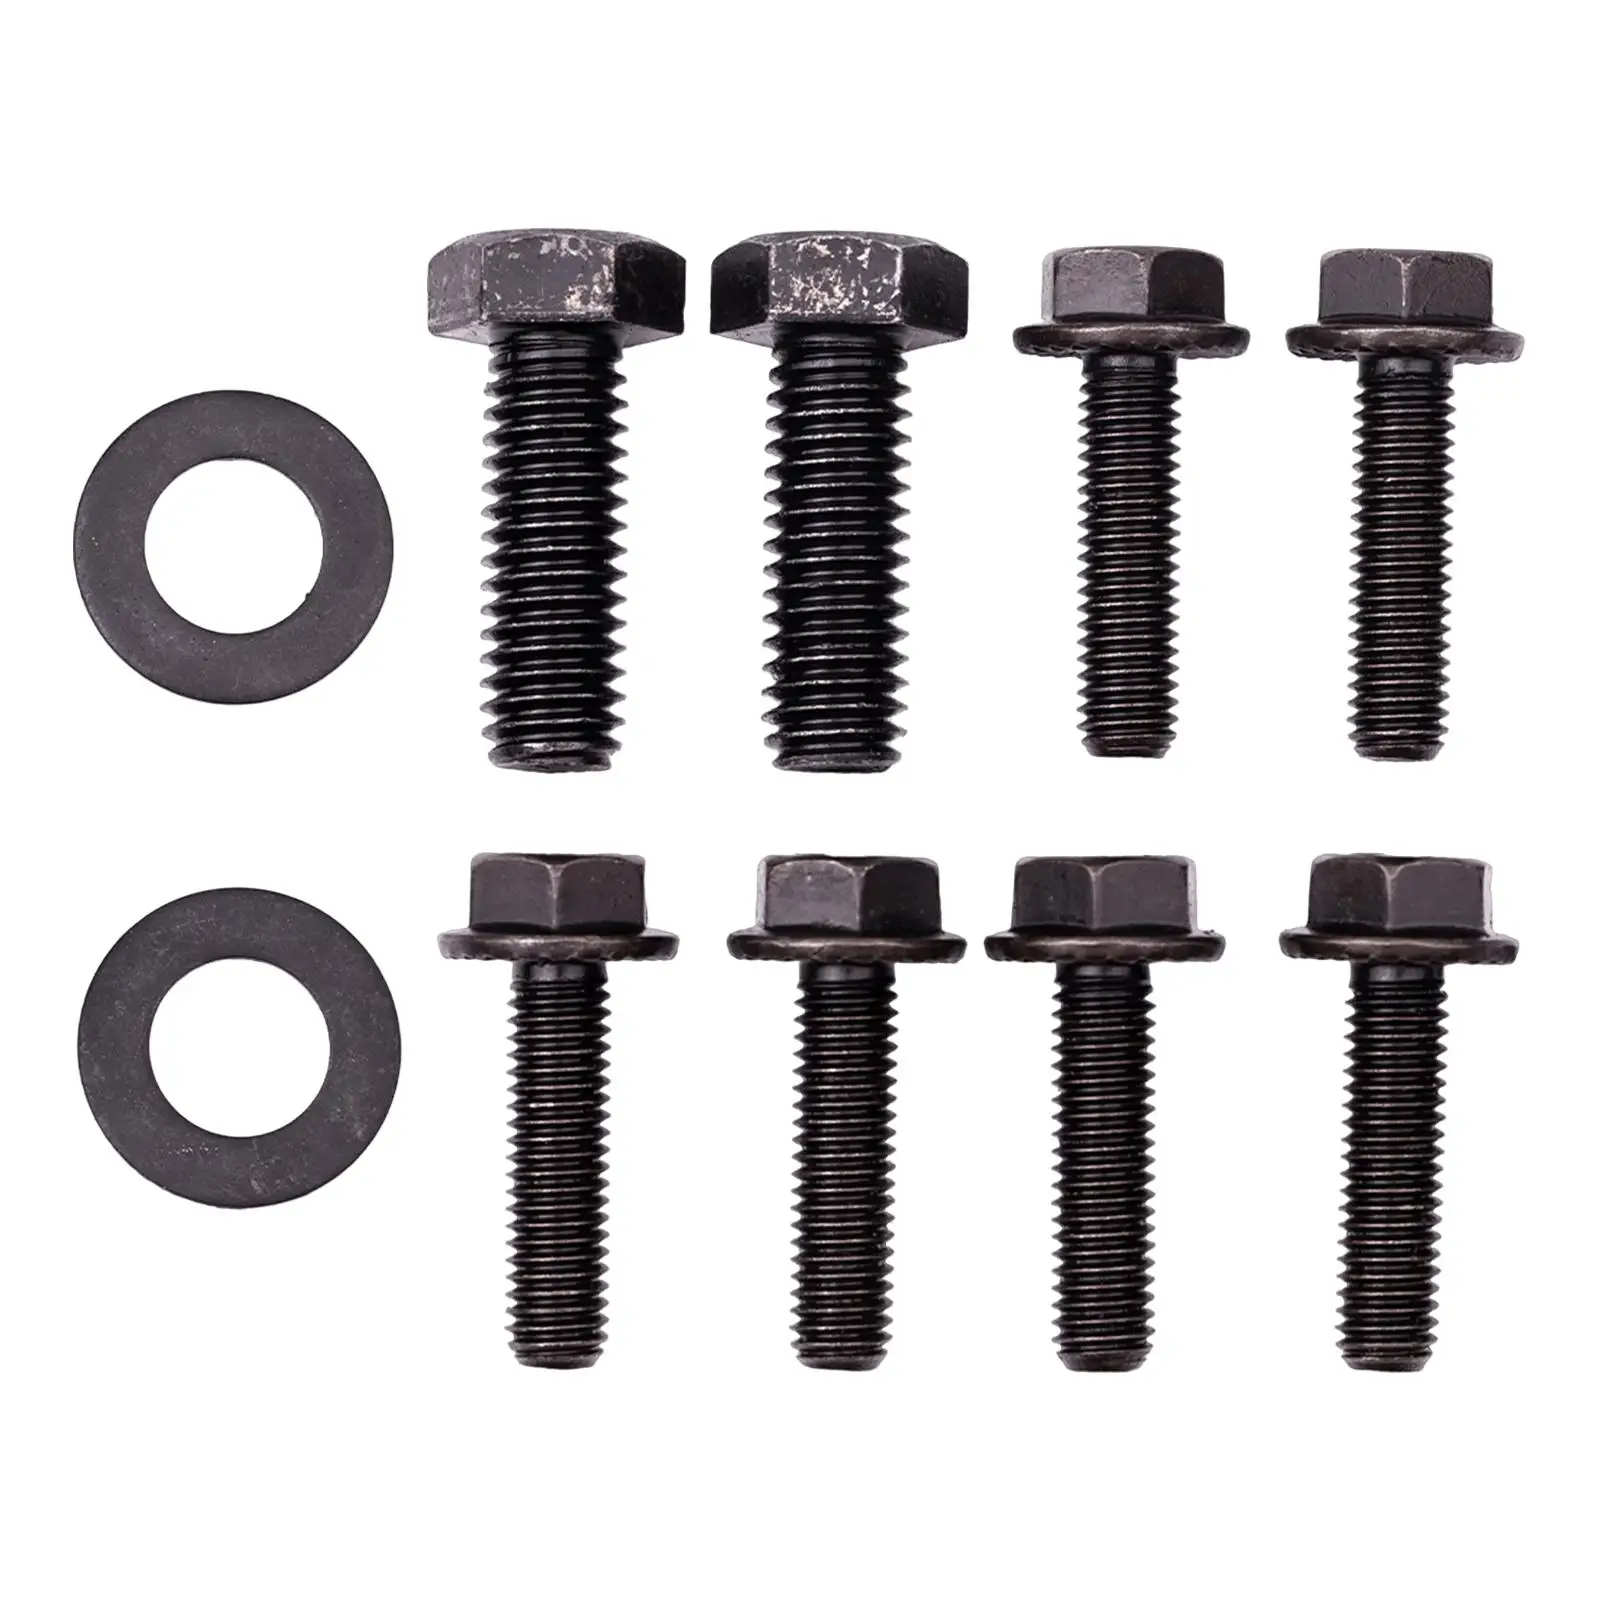 Front Seat Mounting Bolts Heavy Duty Supplies Replacement Durable Easily Install Automobile for Jeep Wrangler TJ 1997-2006